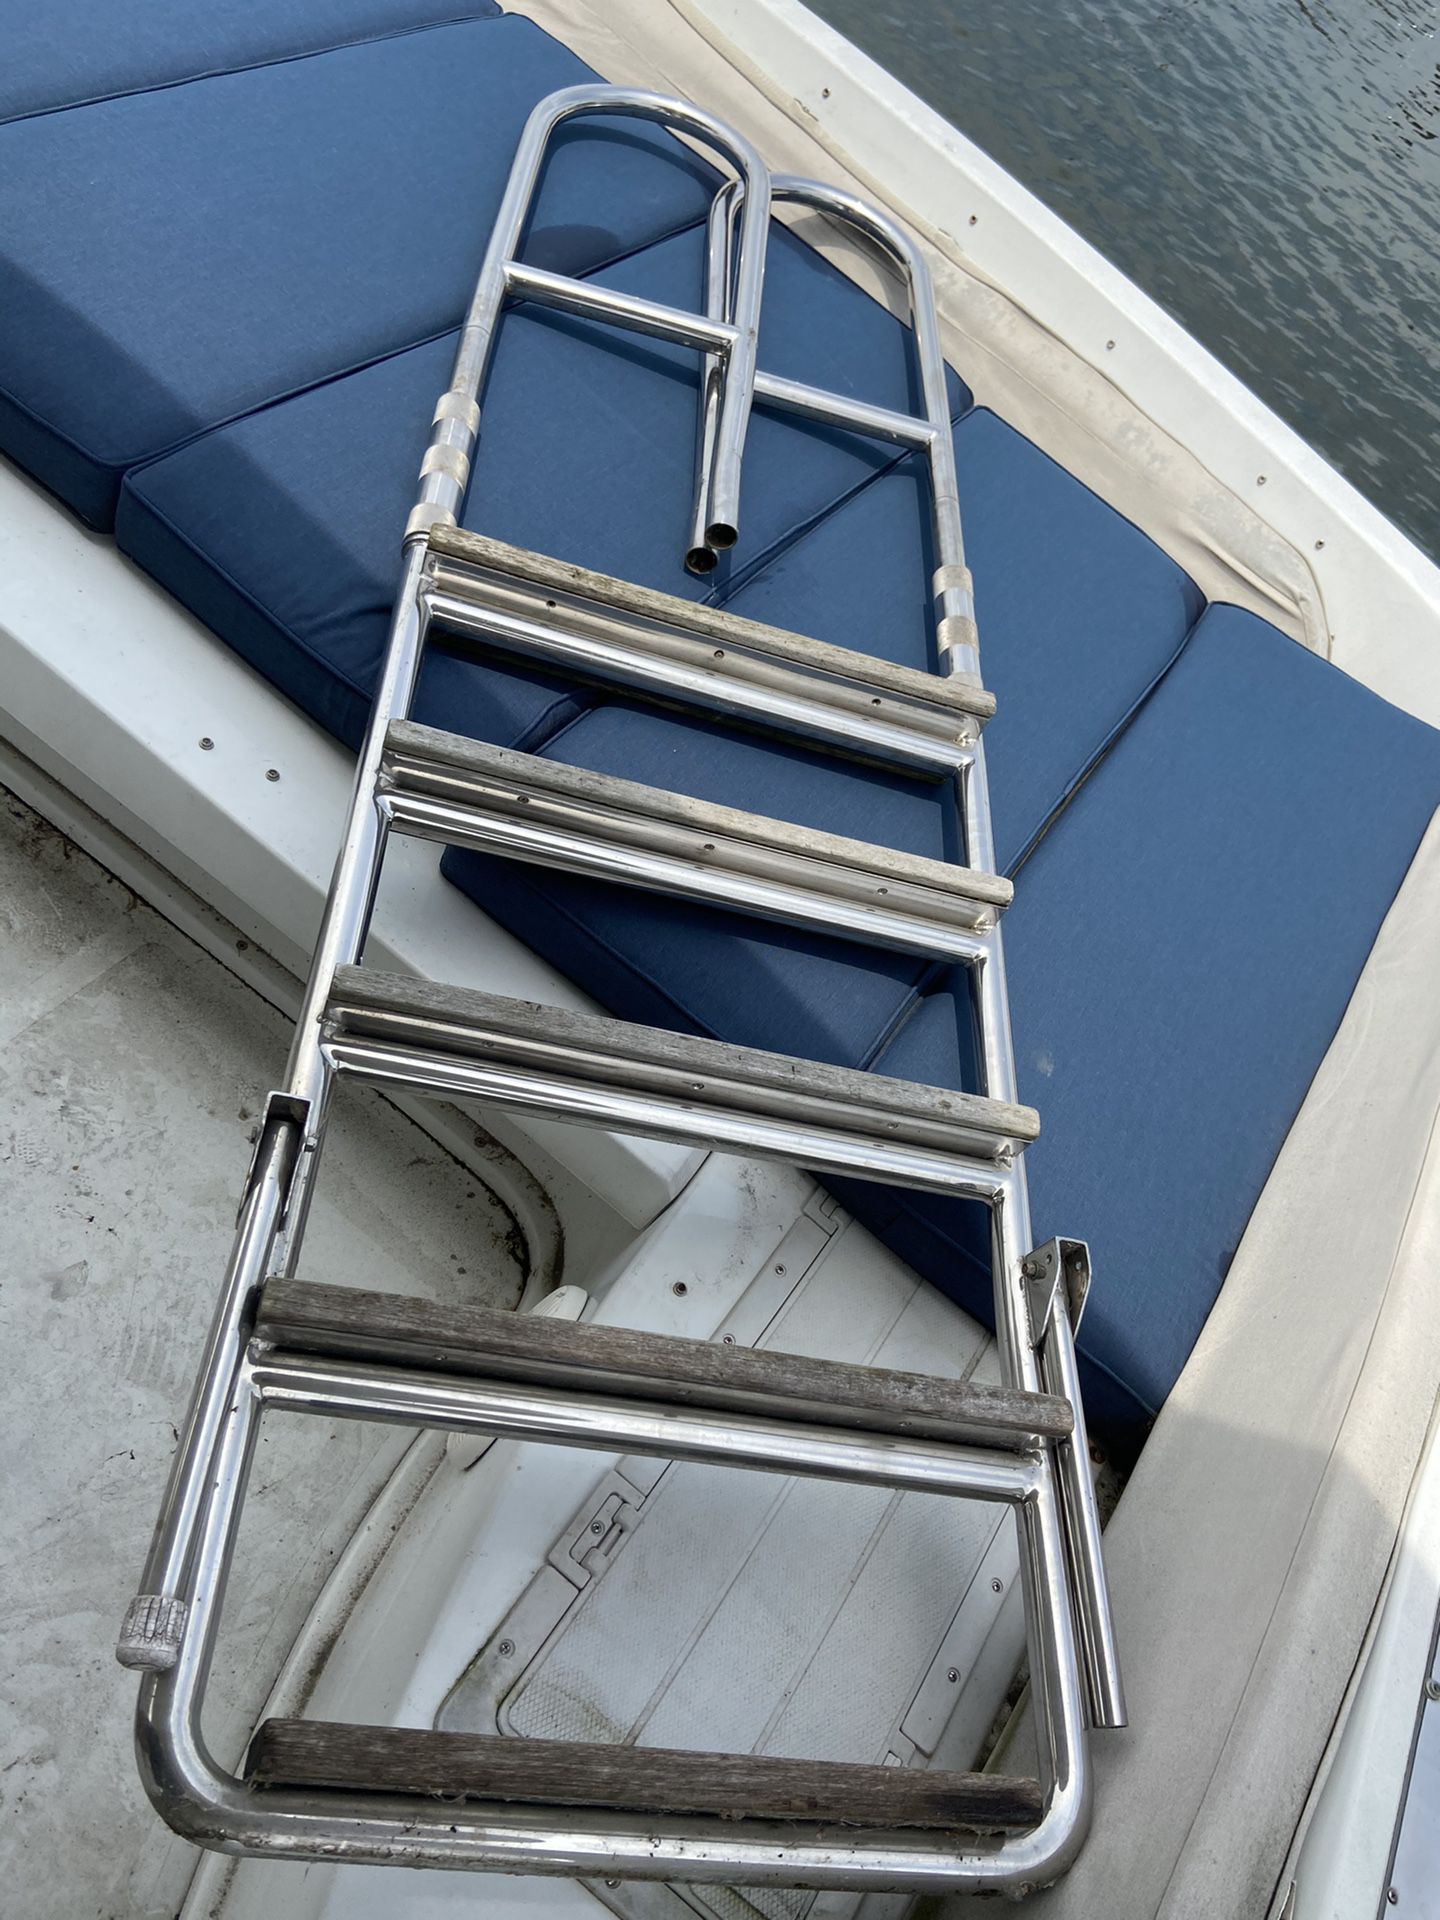 Stainless Steal Ladder